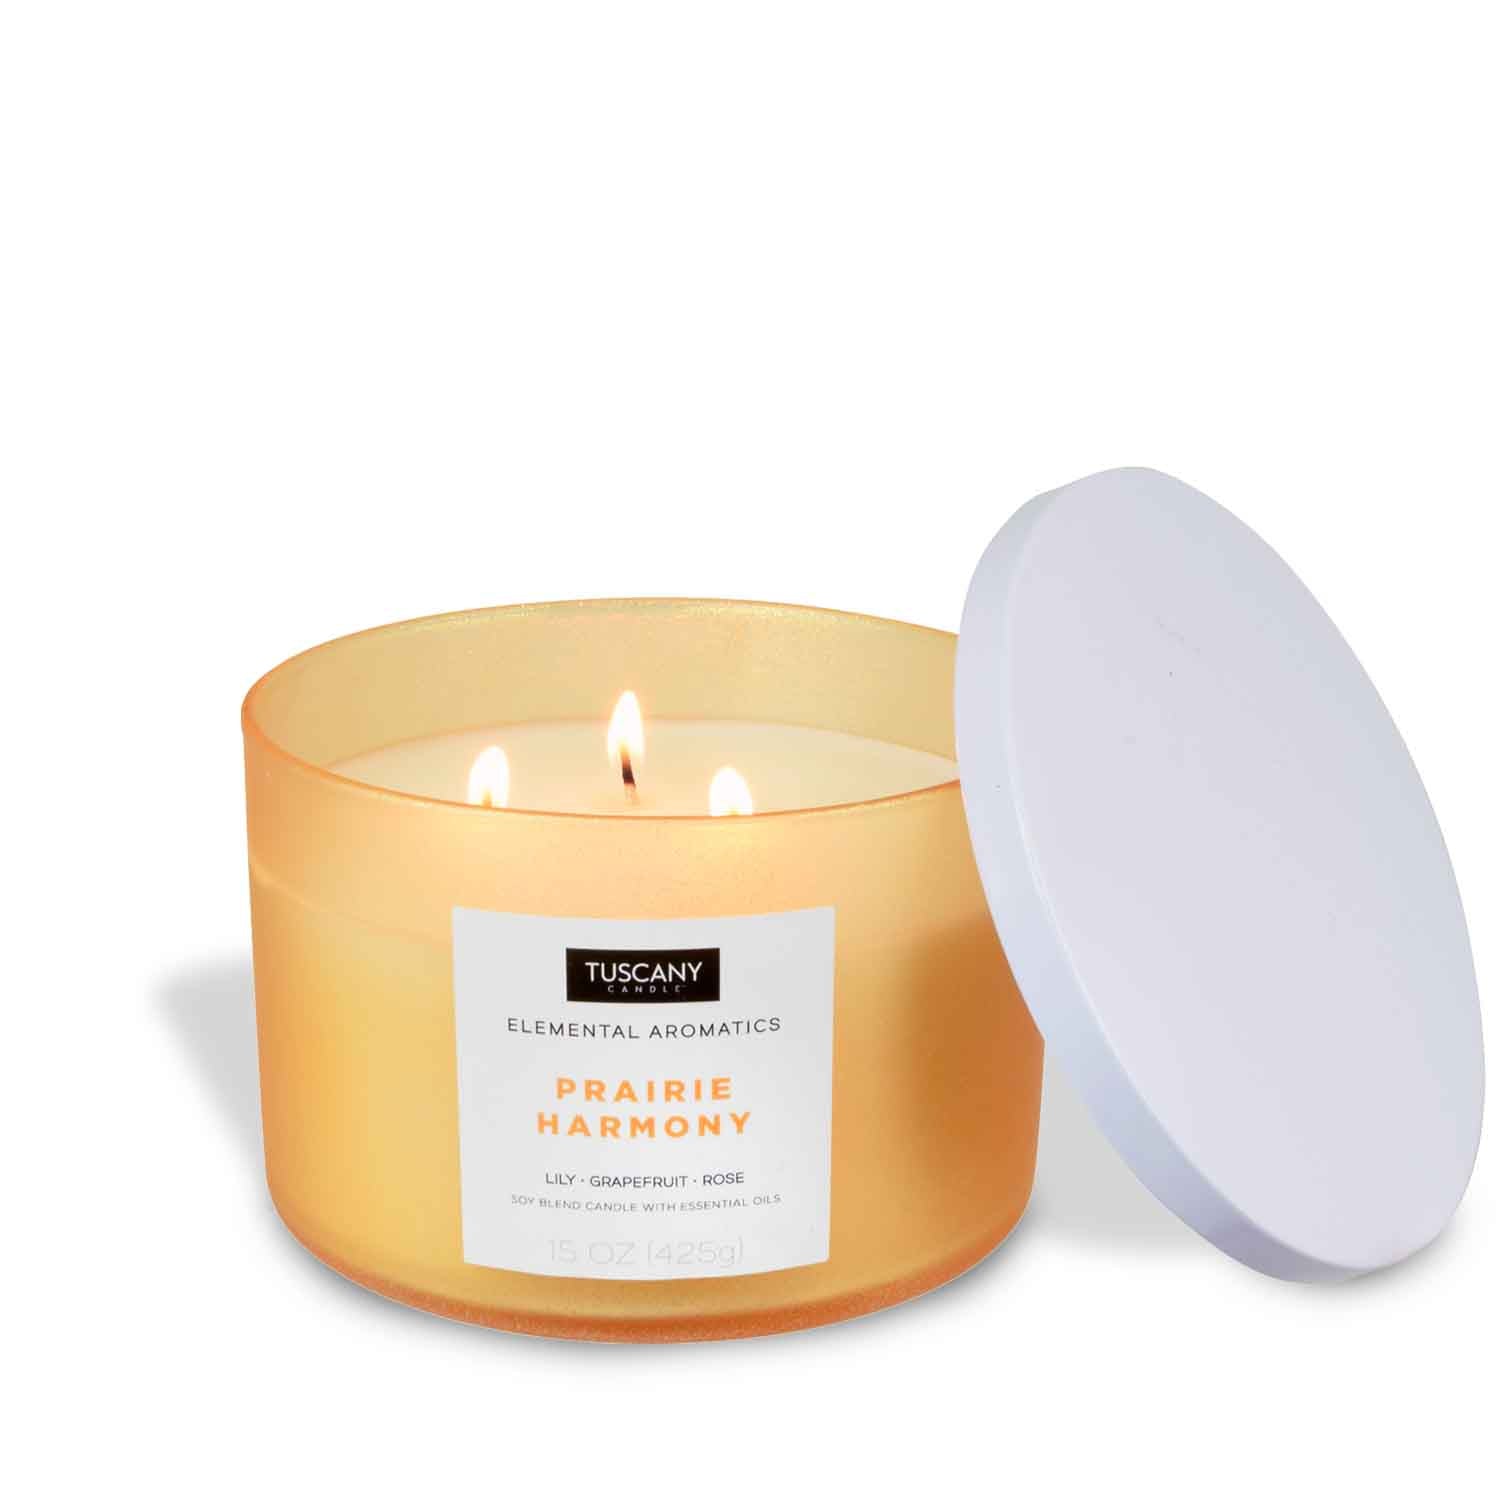 A Prairie Harmony scented candle with an orange lid on it. Brand name: Tuscany Candle® EVD